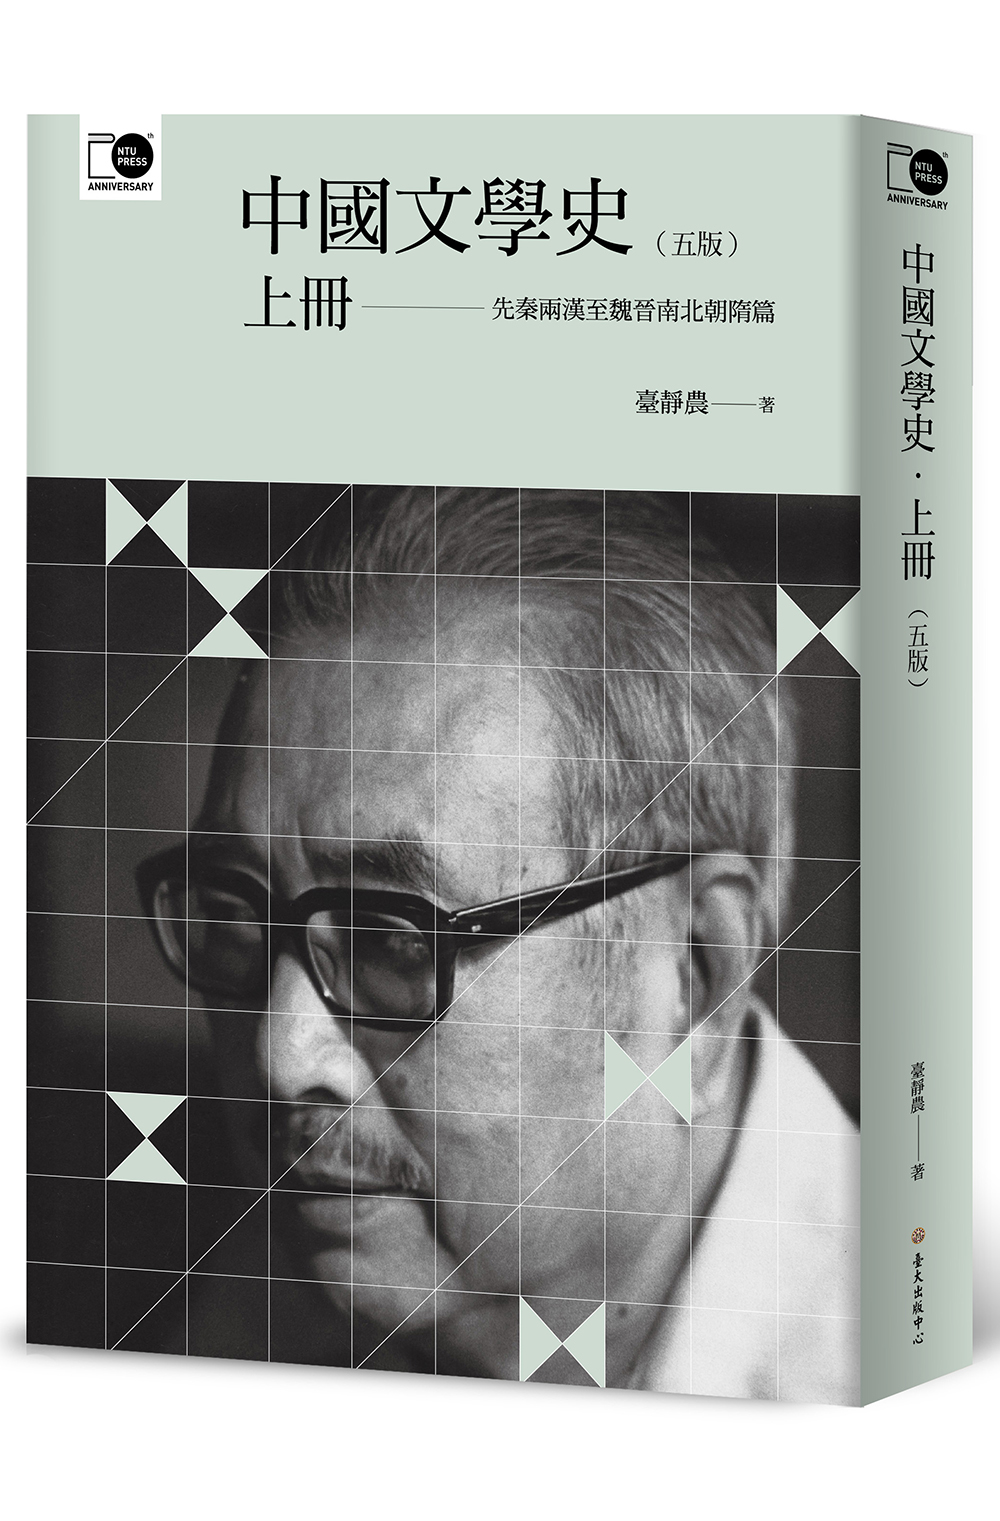 The History of Chinese Literature, Vol. 1